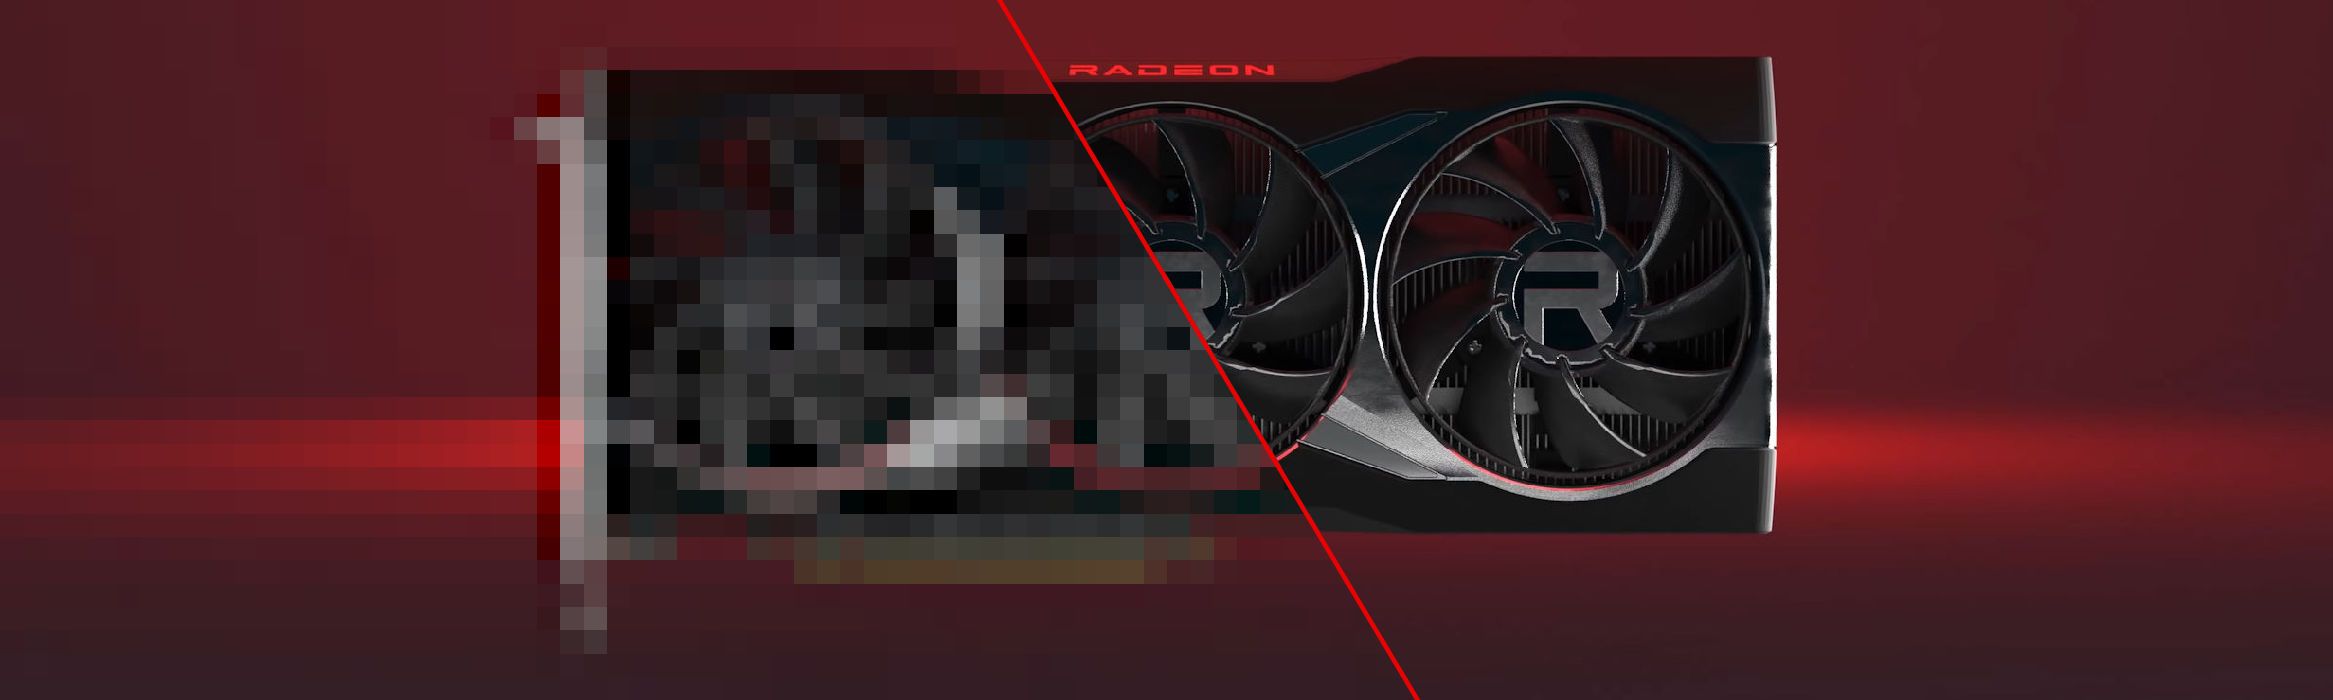 AMD FidelityFX Super Resolution technology may launch this spring -  VideoCardz.com